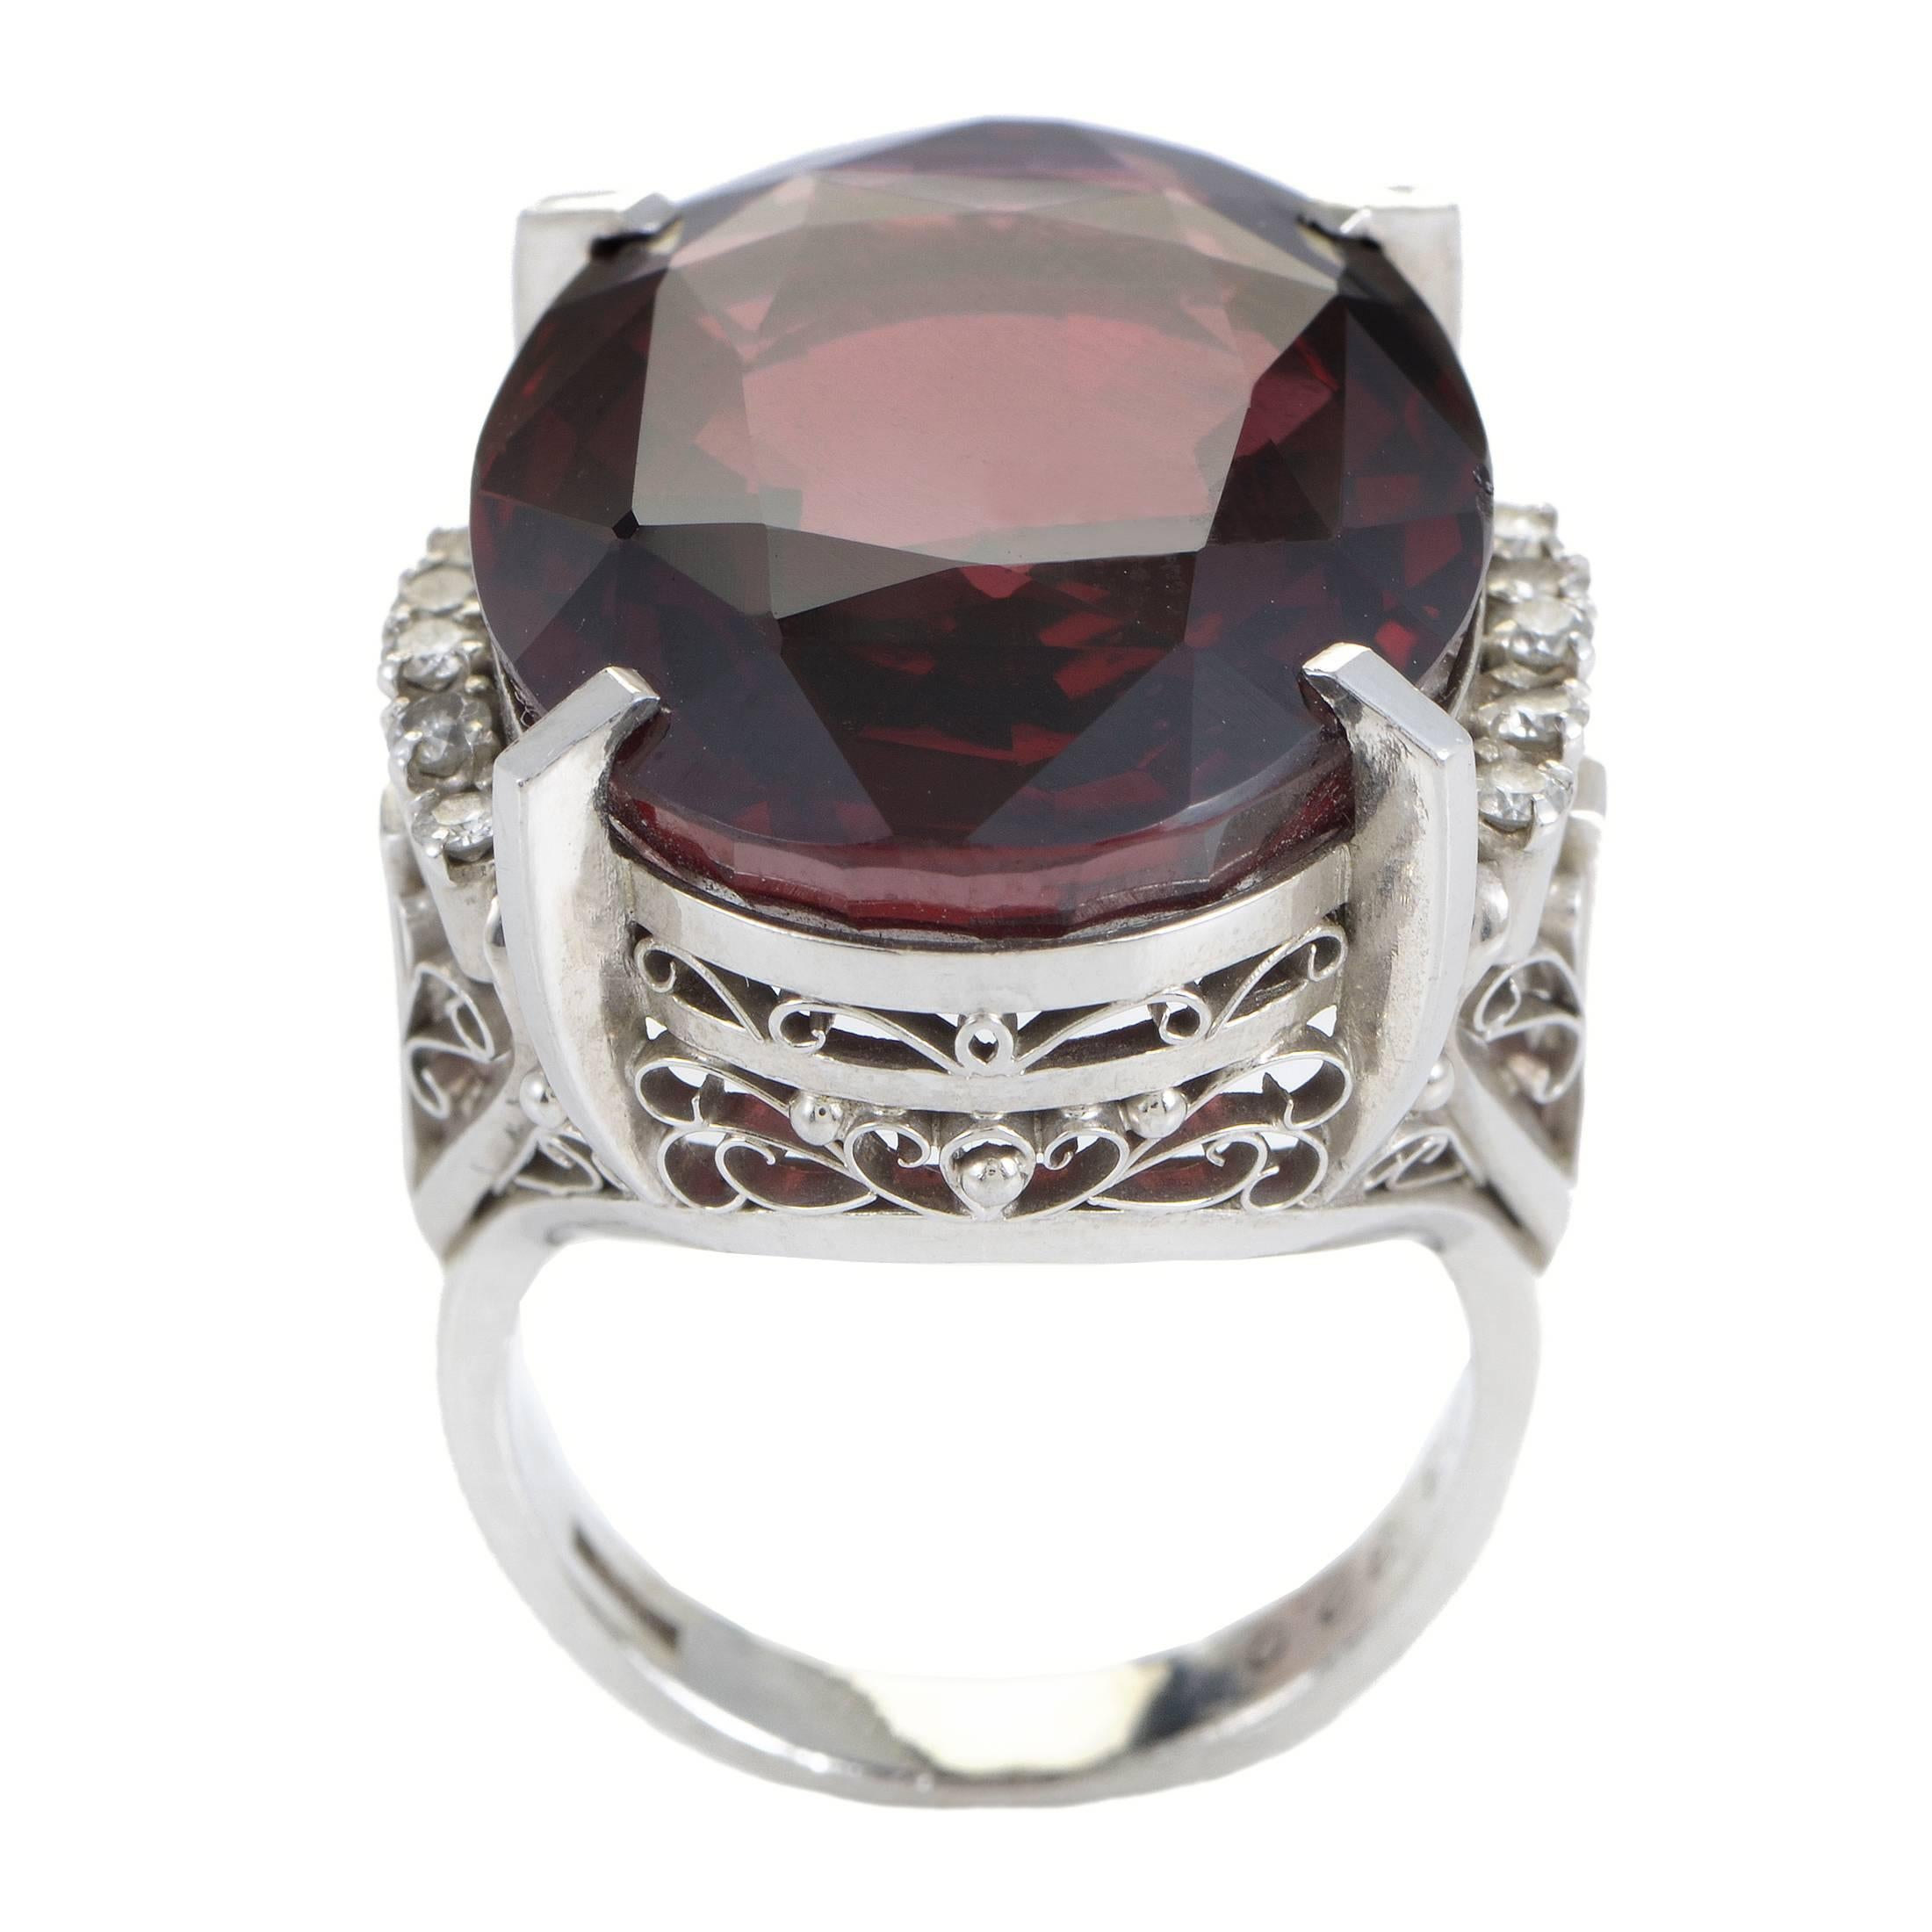 Creating a splendid aura of beauty through the stunning color and exceptional cut of the gorgeous tourmaline as well as the magnificent ornamentation surrounding it, this marvelous ring is made of platinum and embellished also with 0.15ct of